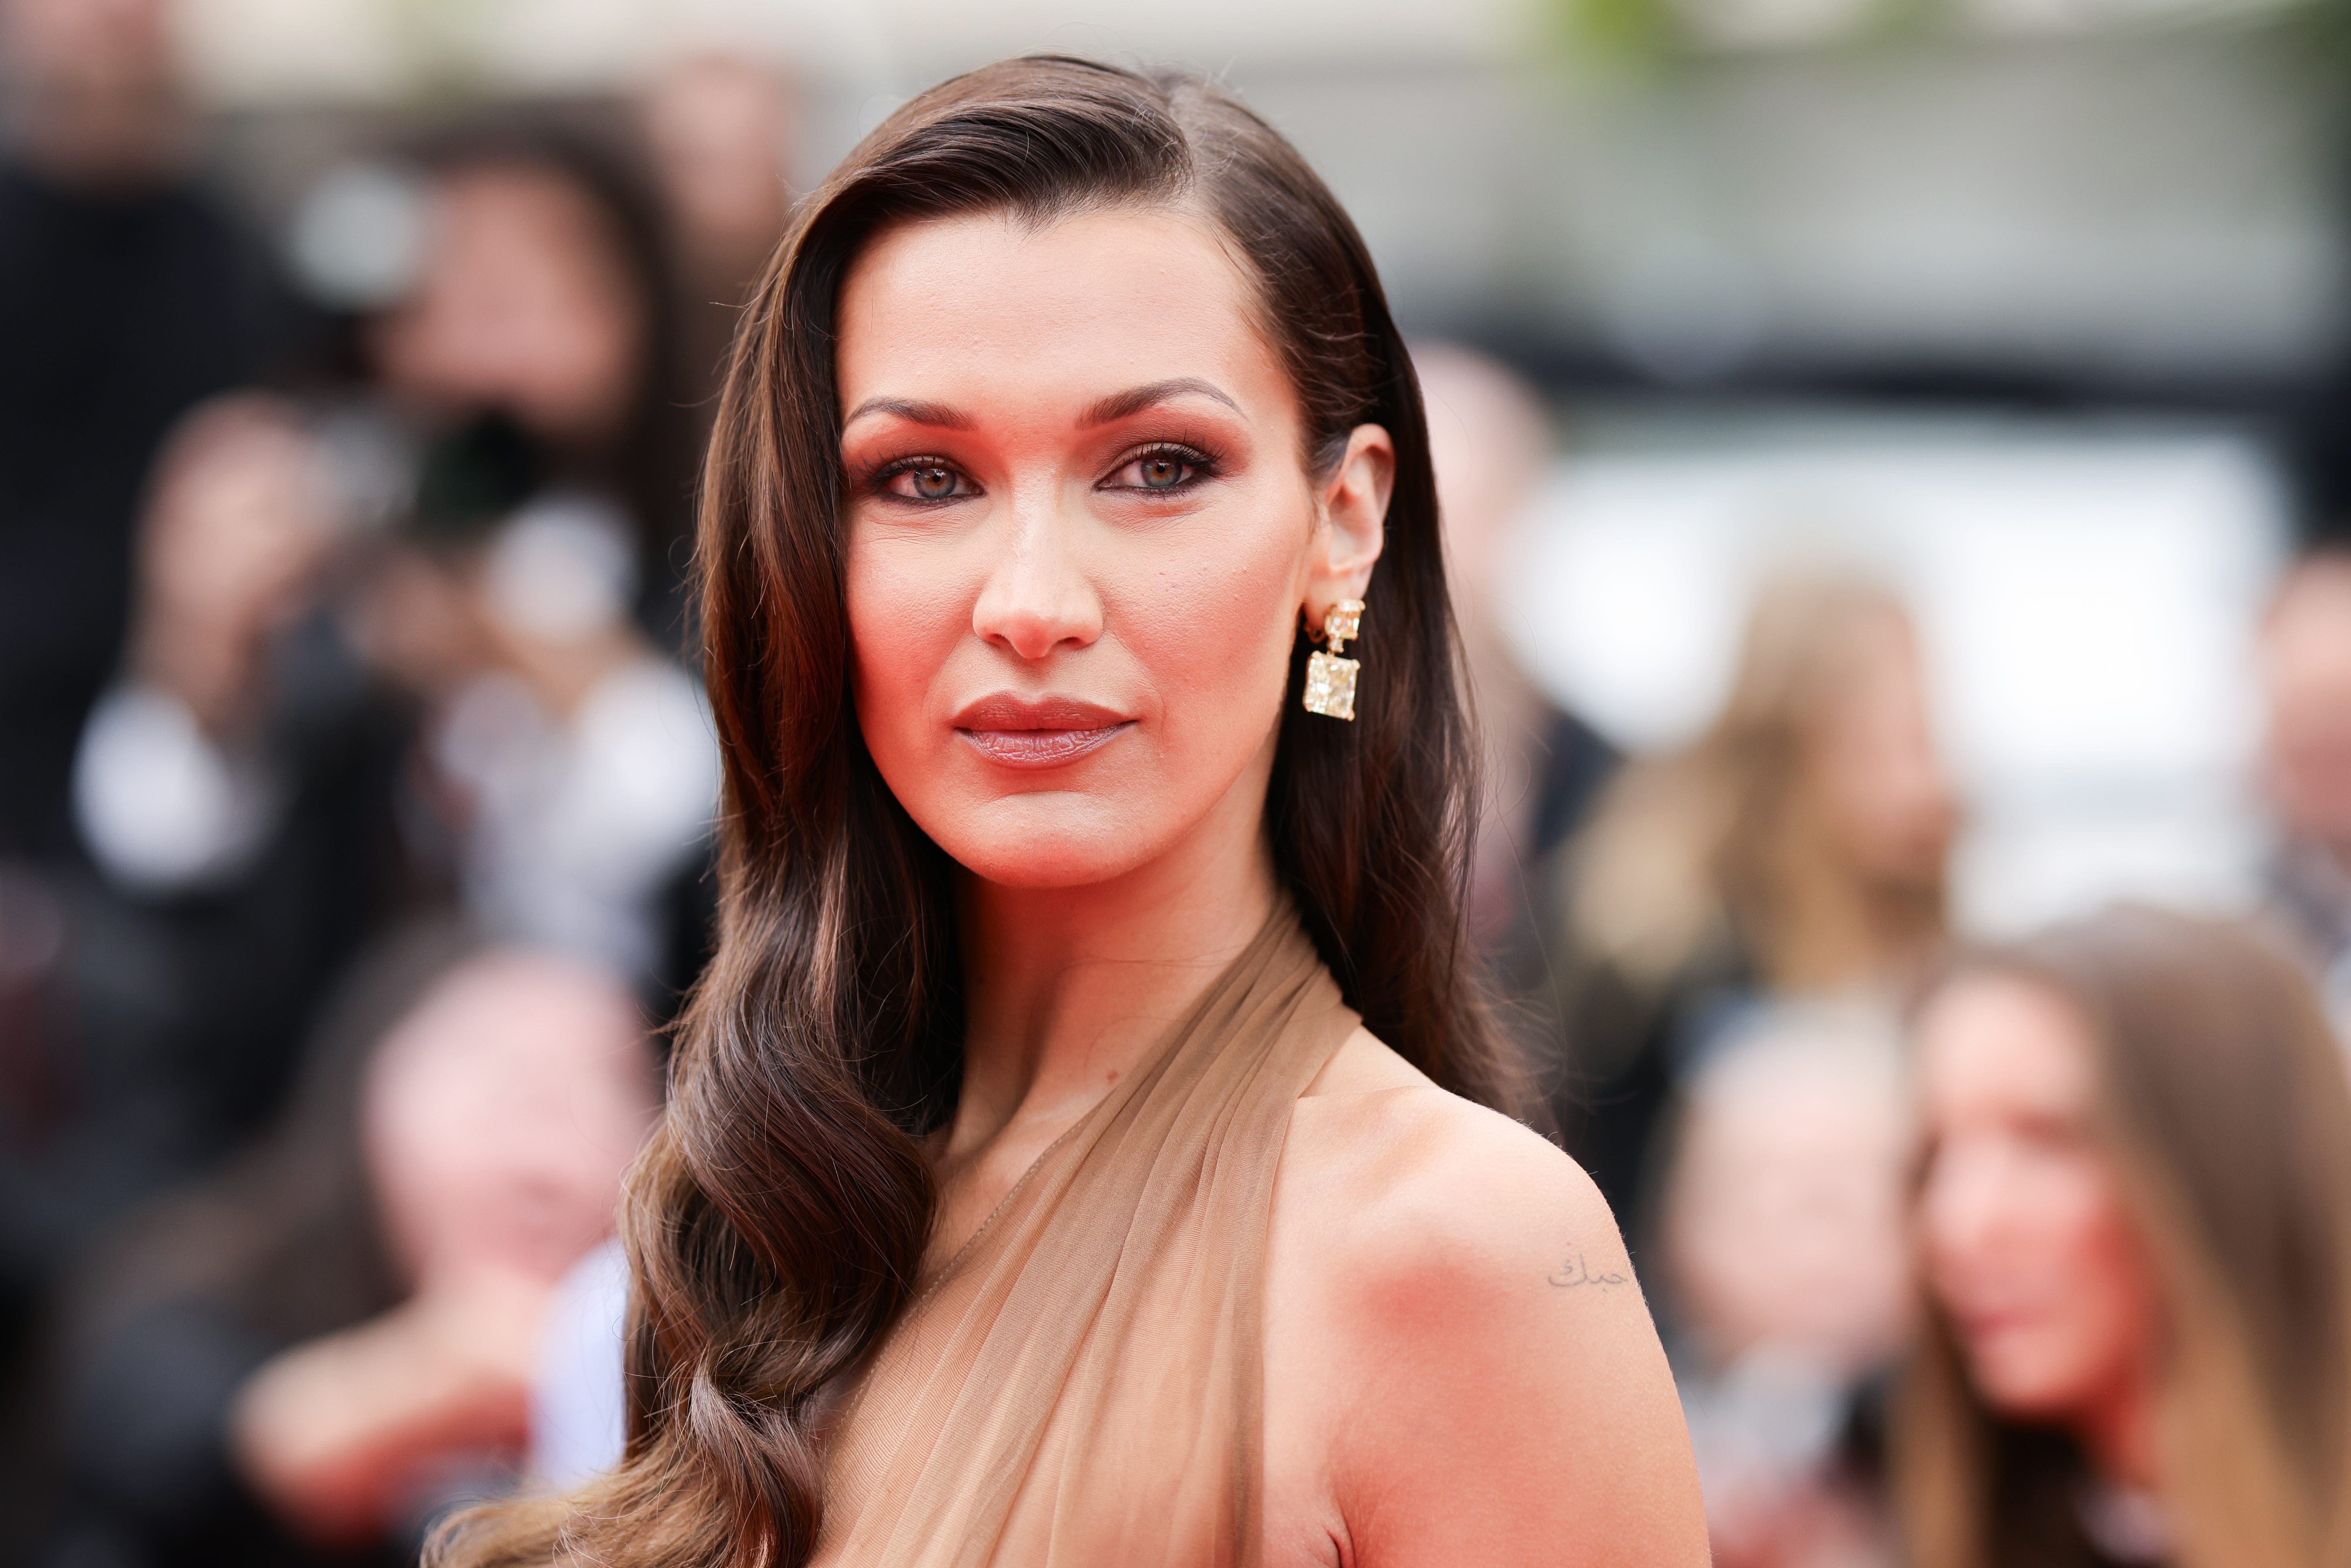 Bella Hadid returns to Cannes in sultry sheer Saint Laurent dress